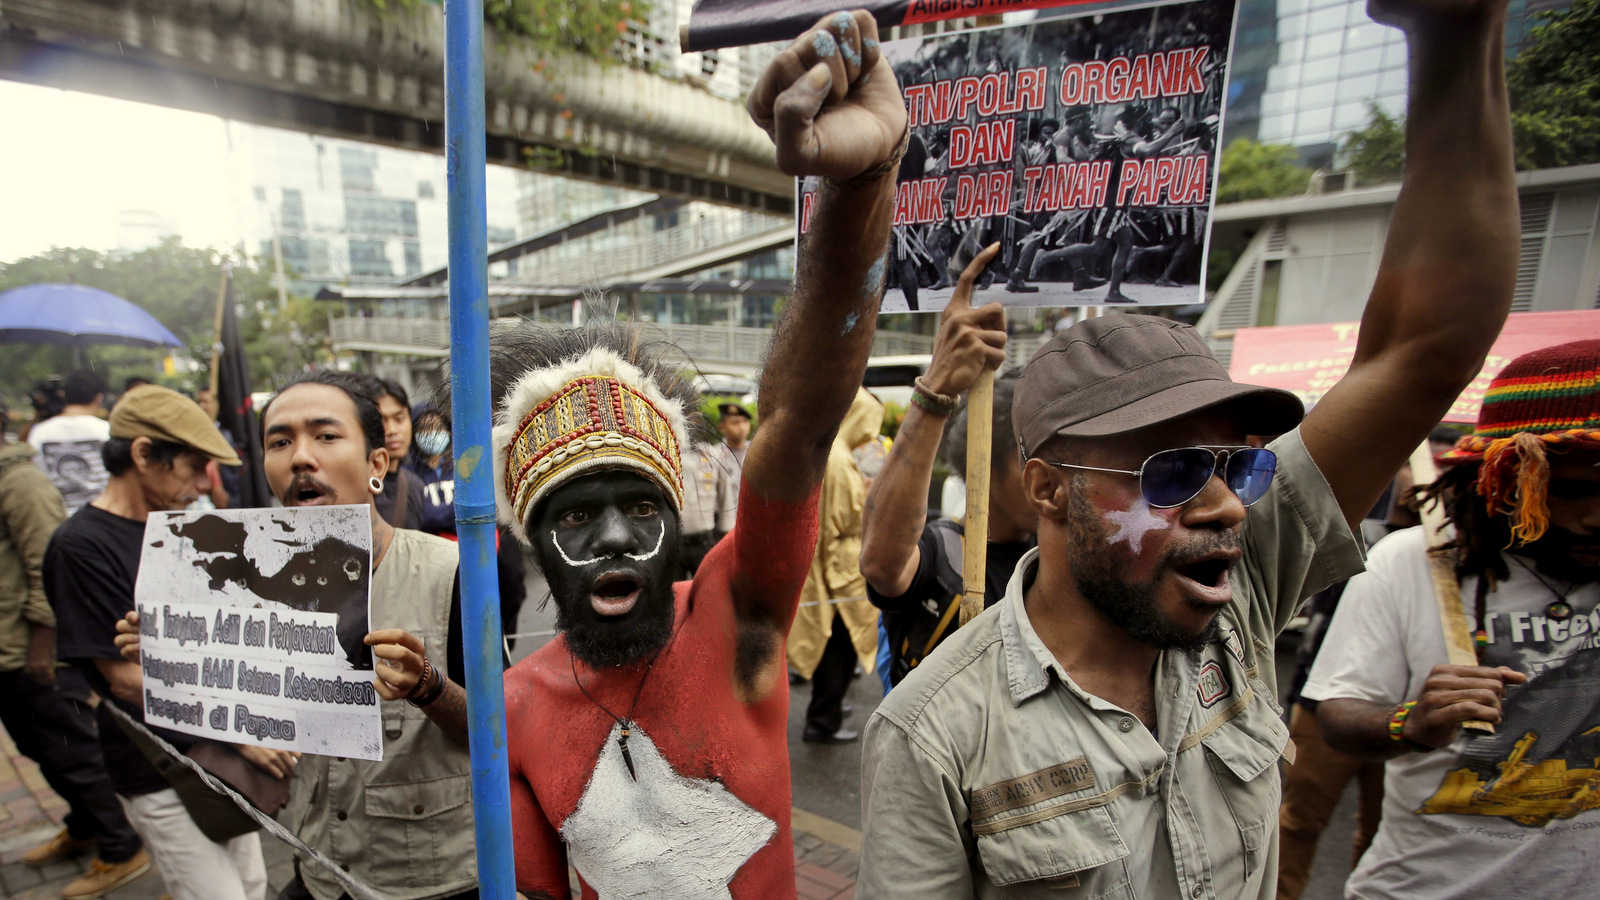 A Papuan activist whose body is painted with the colors of "Morning Star" separatist flag shouts slogans during a protest against the U.S. mining giant Freeport-McMoRan Copper & Gold Inc. in Jakarta, Indonesia, Monday, March 20, 2017. A group of activists staged the protest demanding the New Orleans-based mining company close its mine in Papua province saying that it siphons off the region's wealth and gives it little in return. (AP/Achmad Ibrahim)